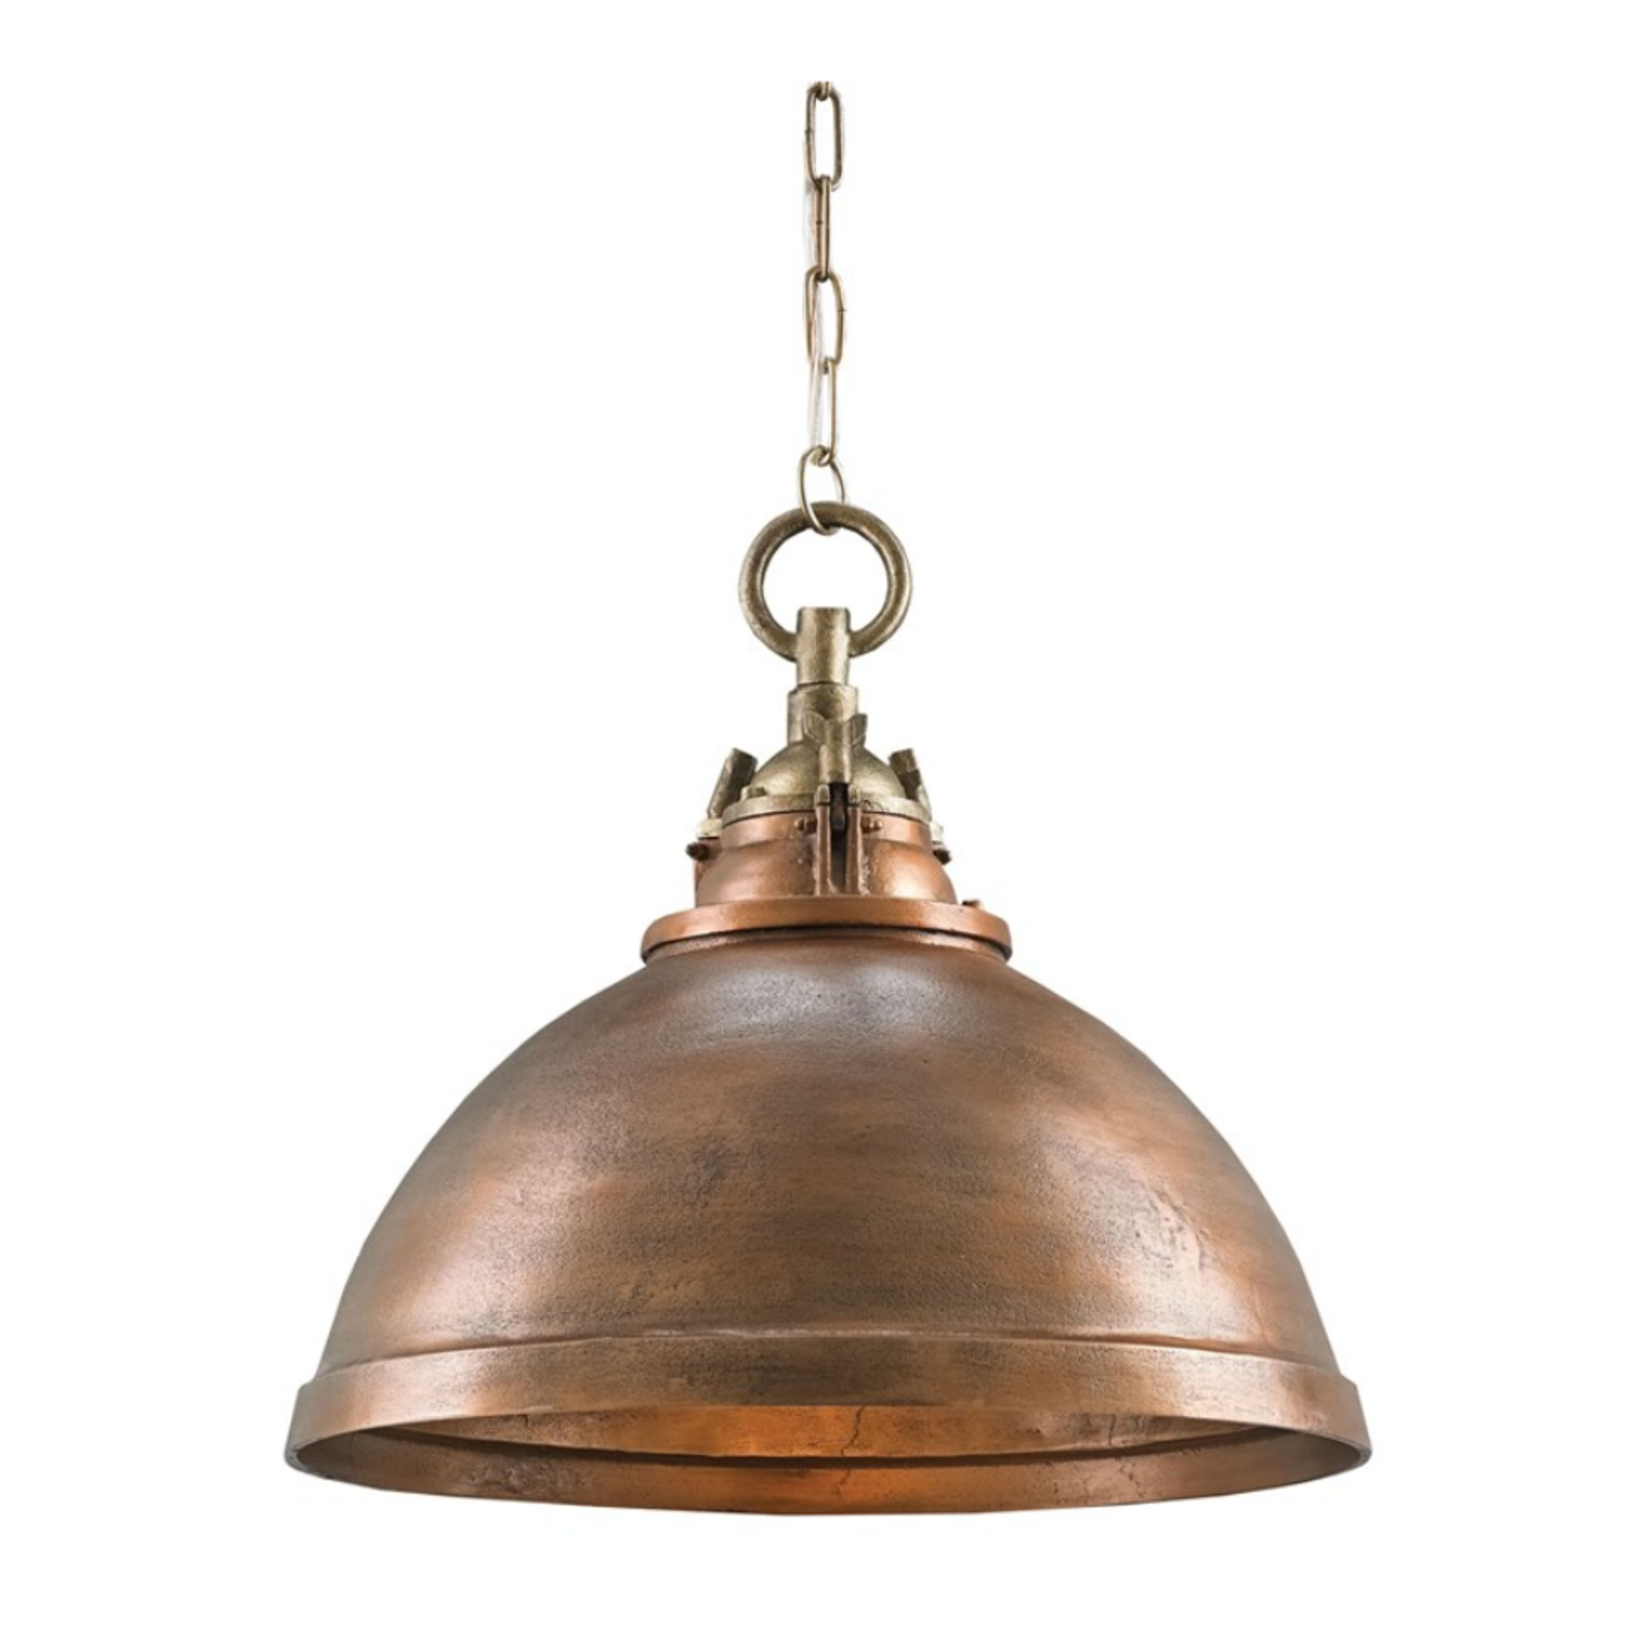 CURREY & CO ADMIRAL PENDANT